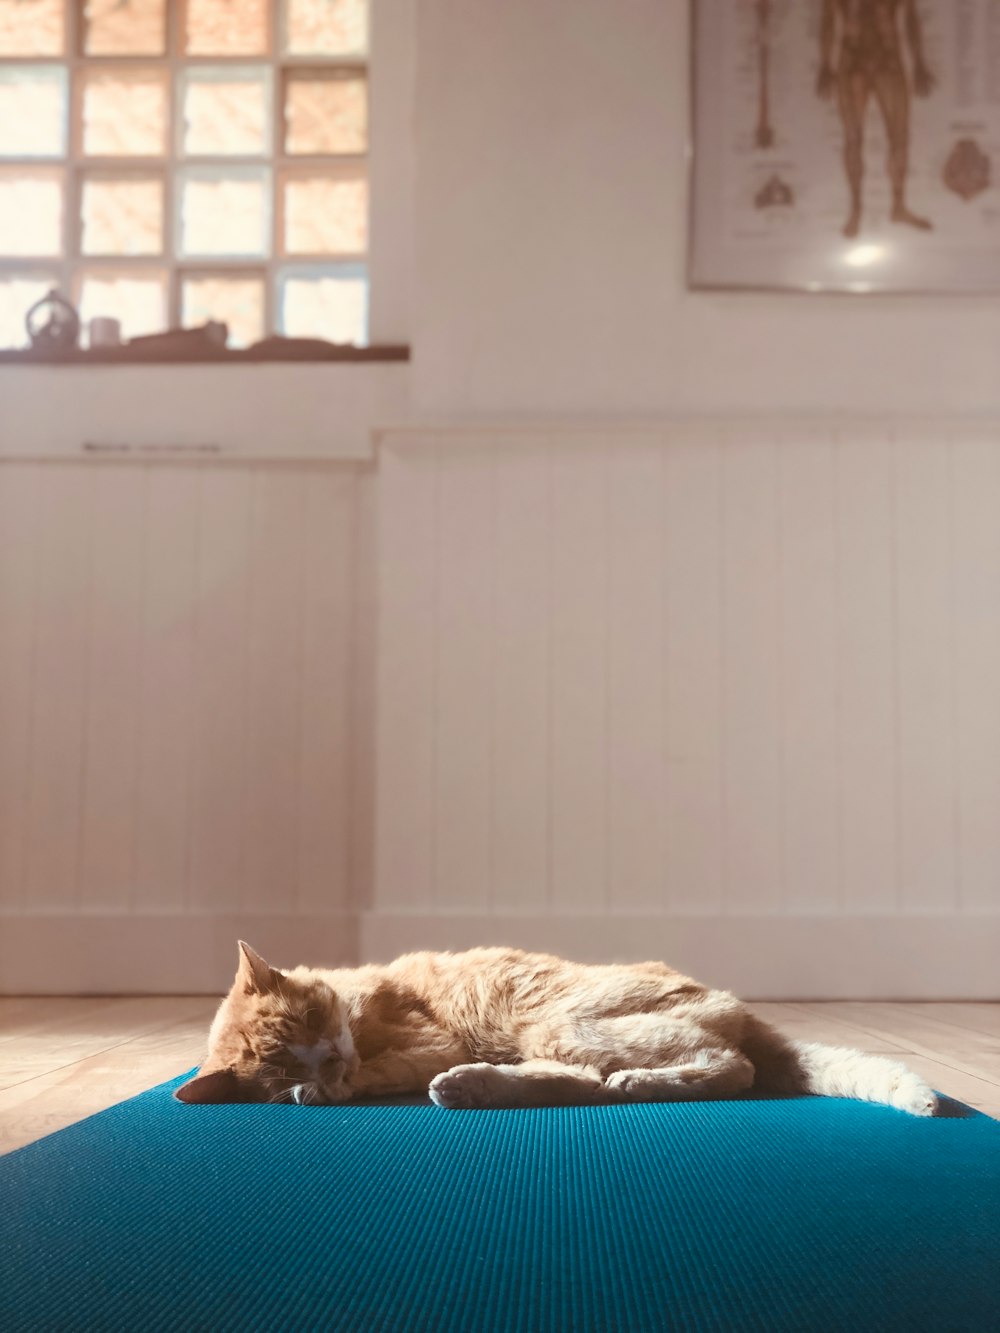 Thomas asleep on a yoga mat in the Sweetyoga Studio Central Portugal.